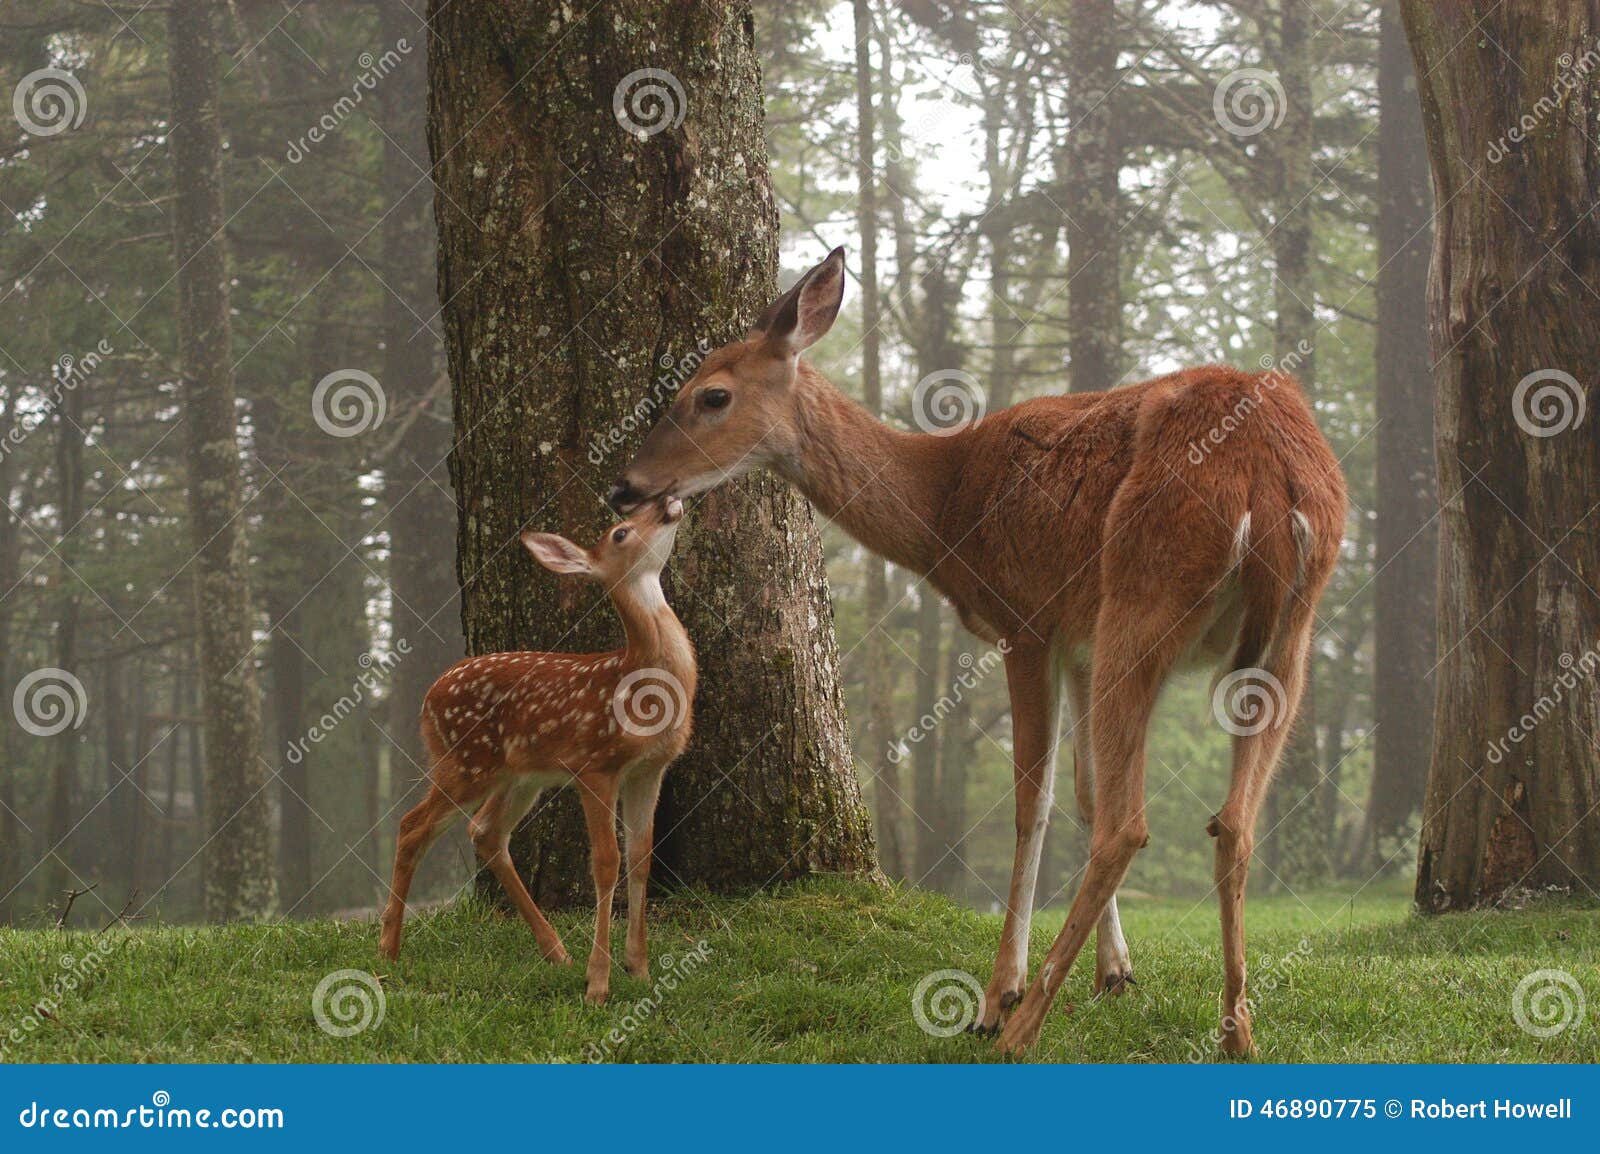 doe and fawn rubbing noses